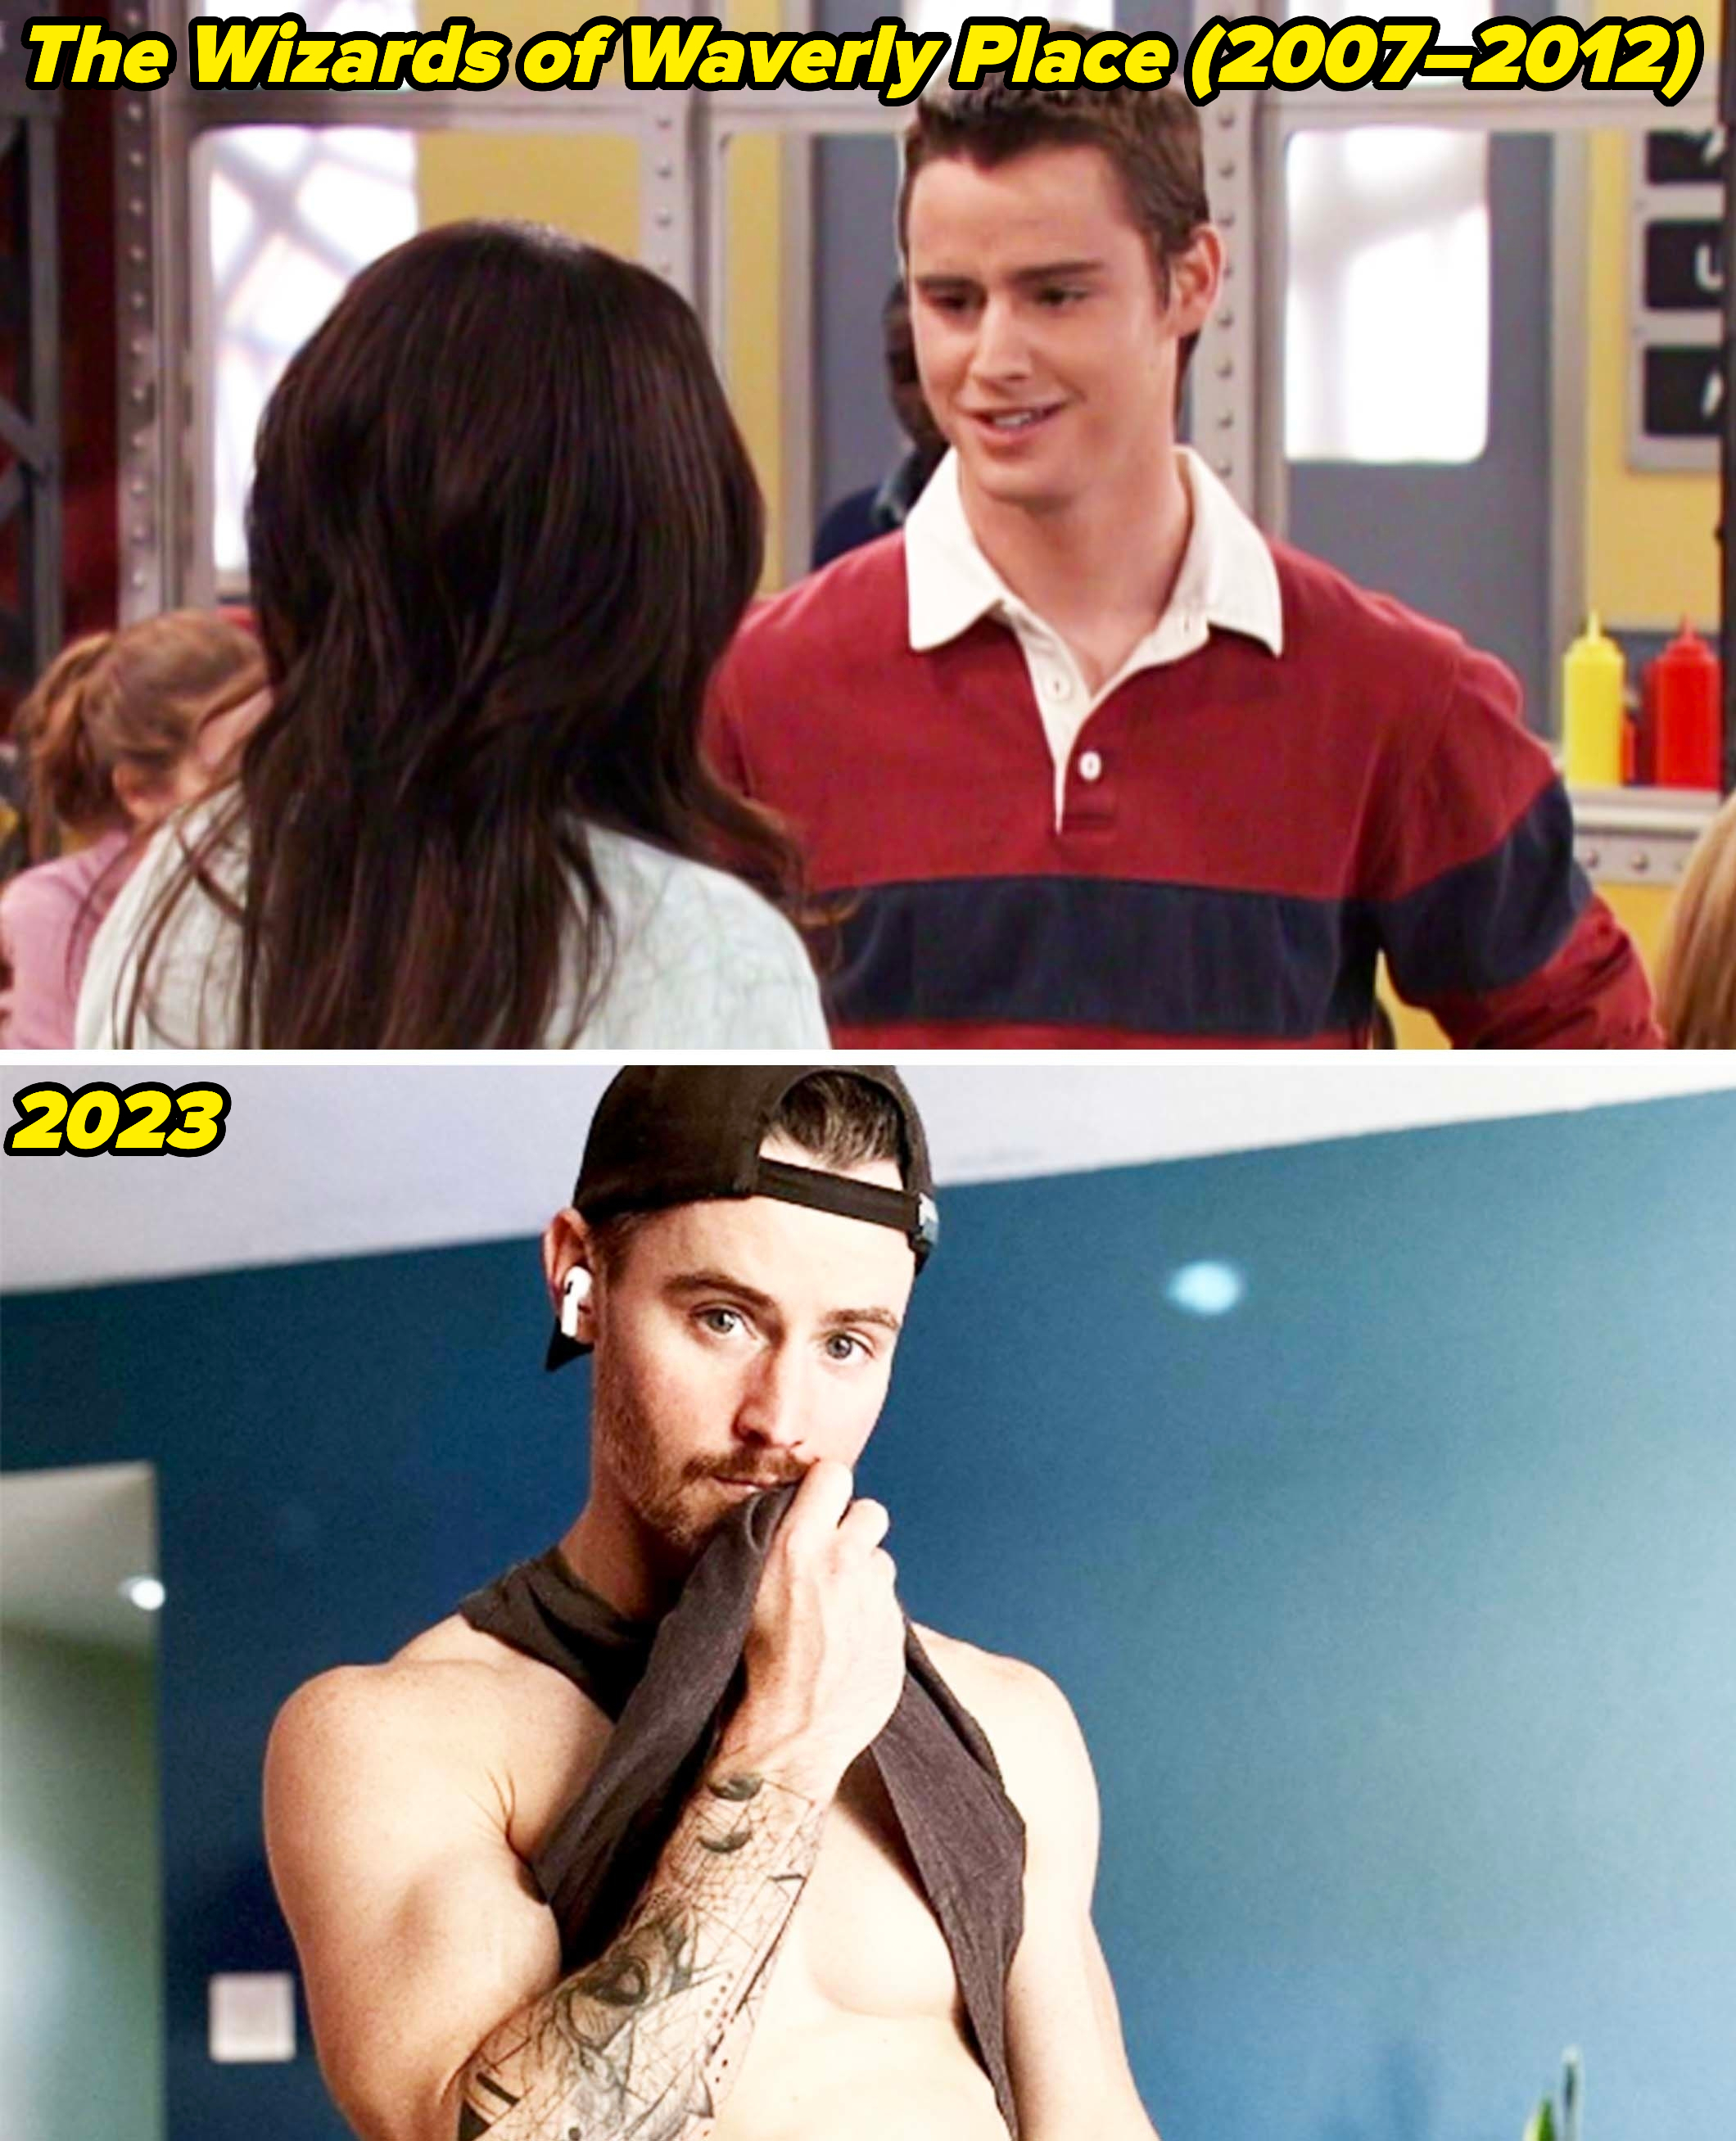 Daniel in The Wizards of Waverly Place from 2007–2012 and in 2023